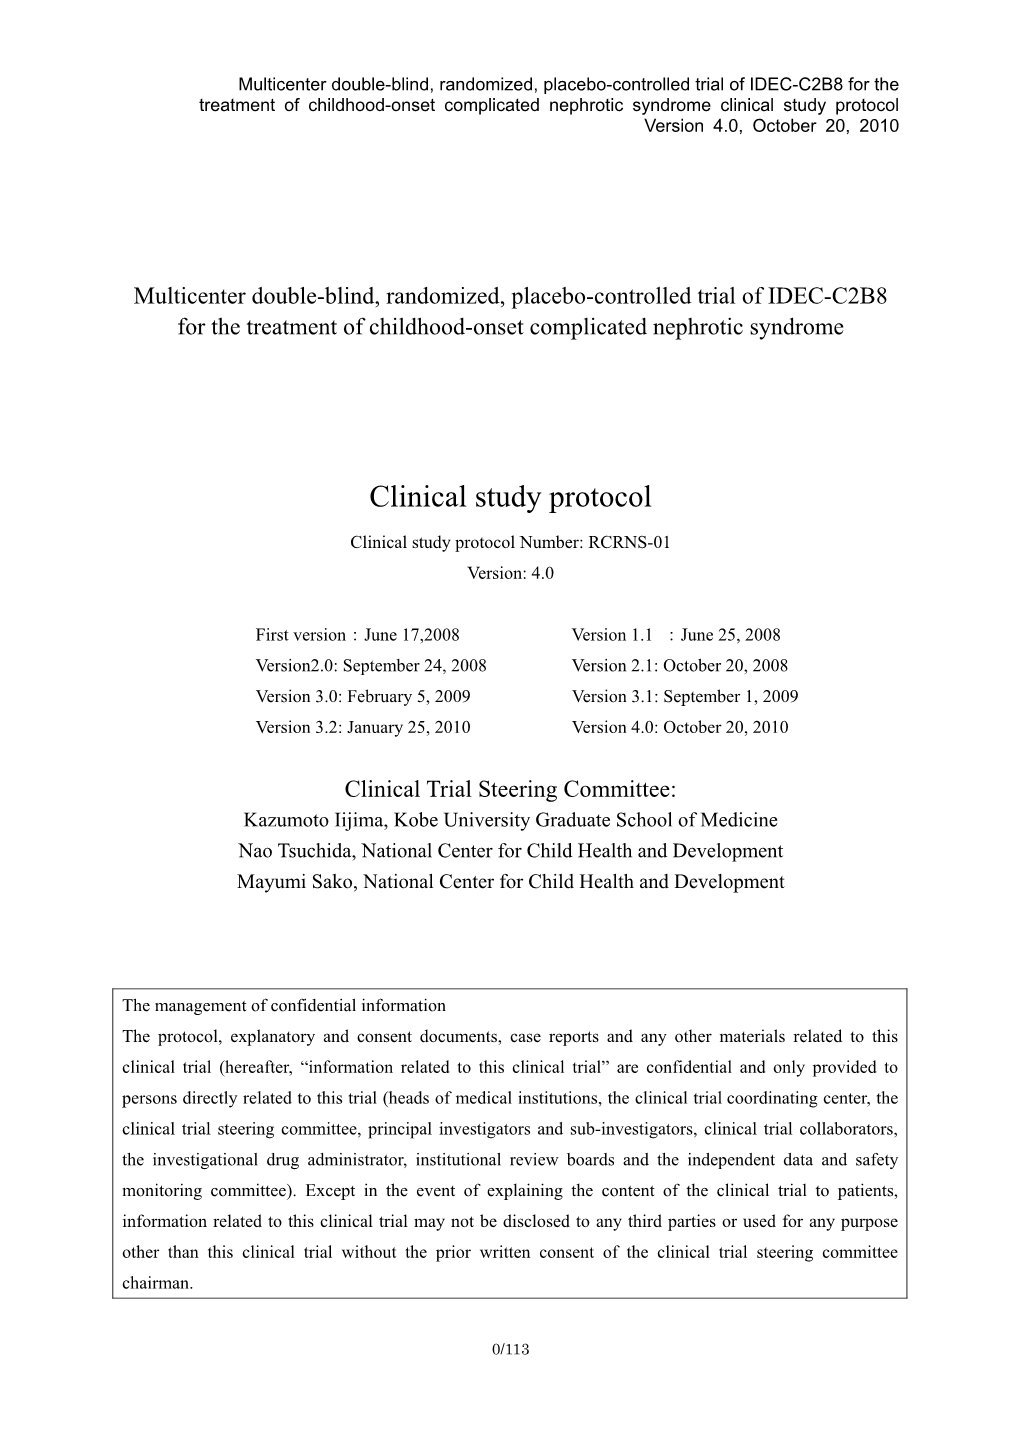 Clinical Study Protocol Version 4.0, October 20, 2010